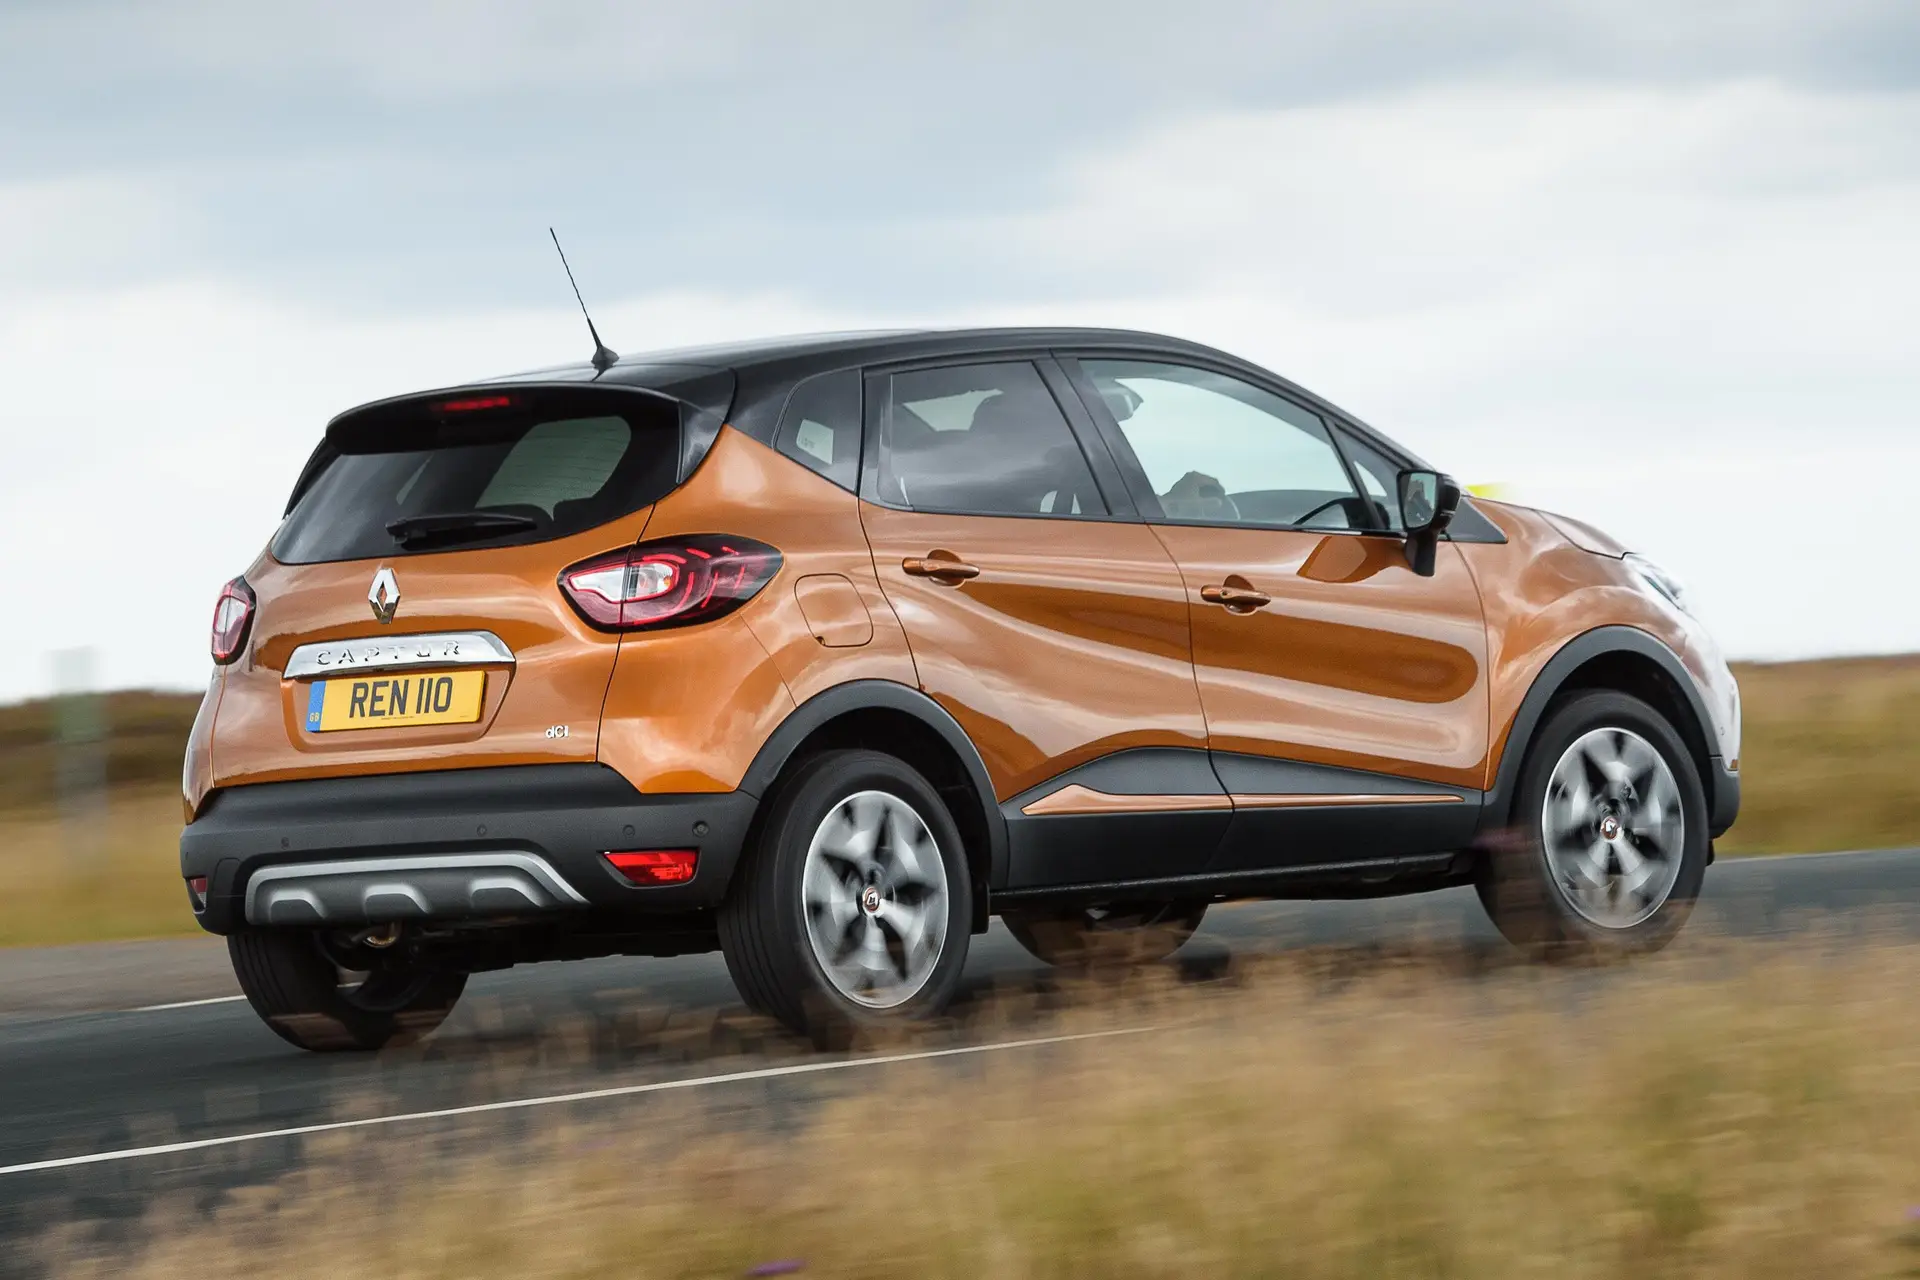 Renault Captur (2013-2019) Review: exterior rear three quarter photo of the Renault Captur on the road